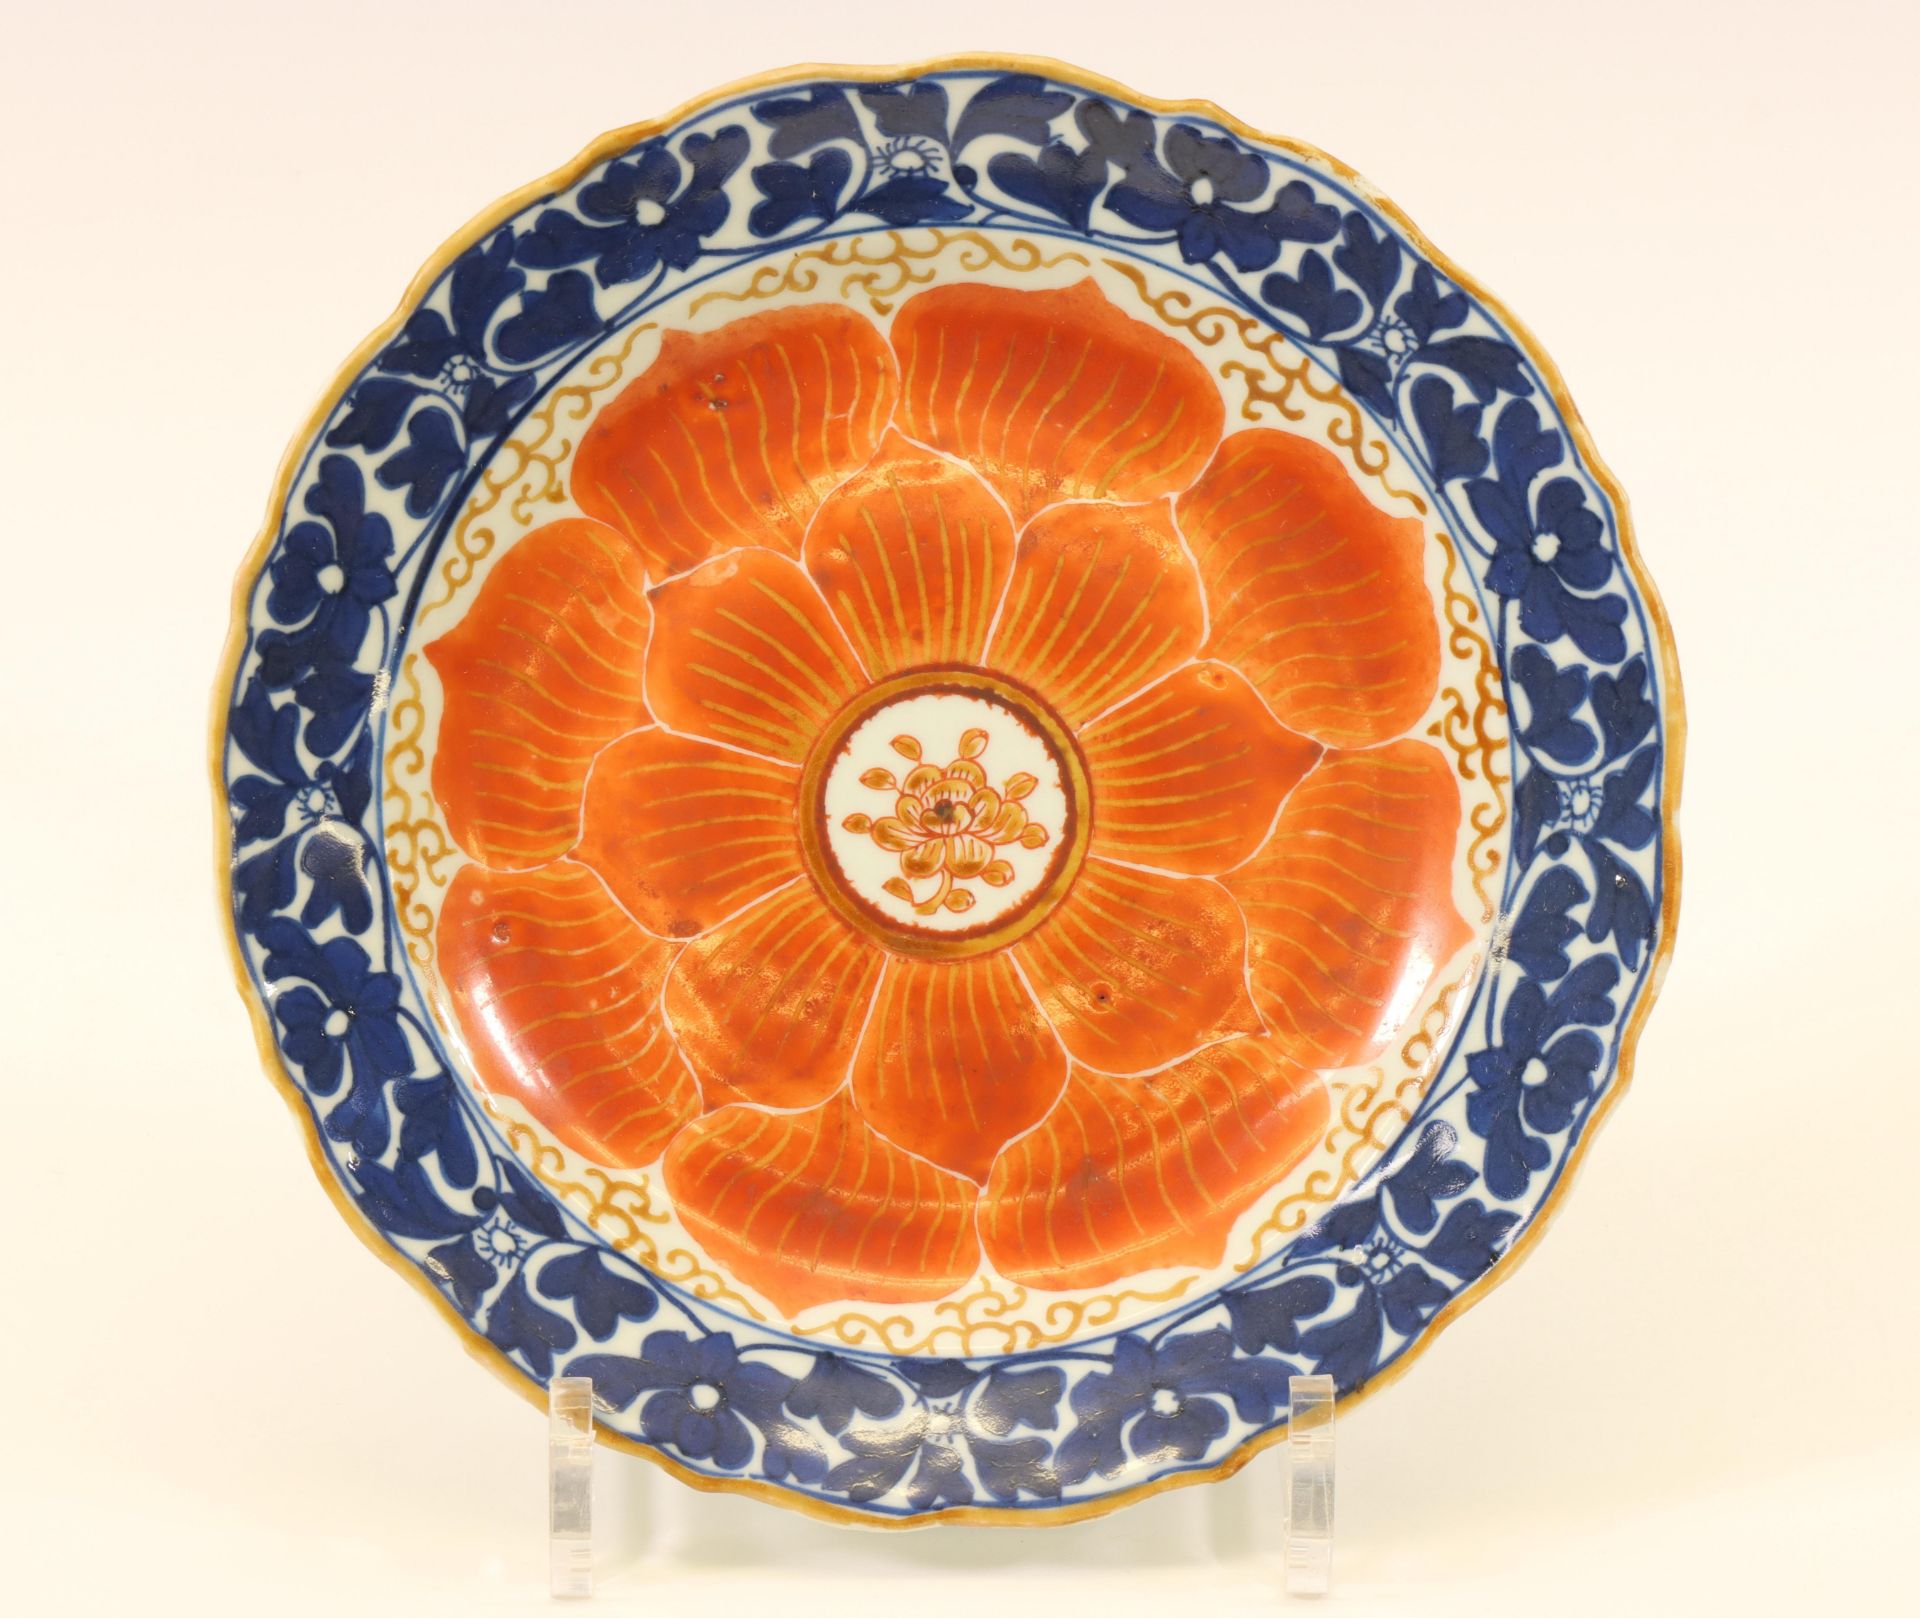 China, blue and white and iron-red decorated 'lotus' plate, 19th century,